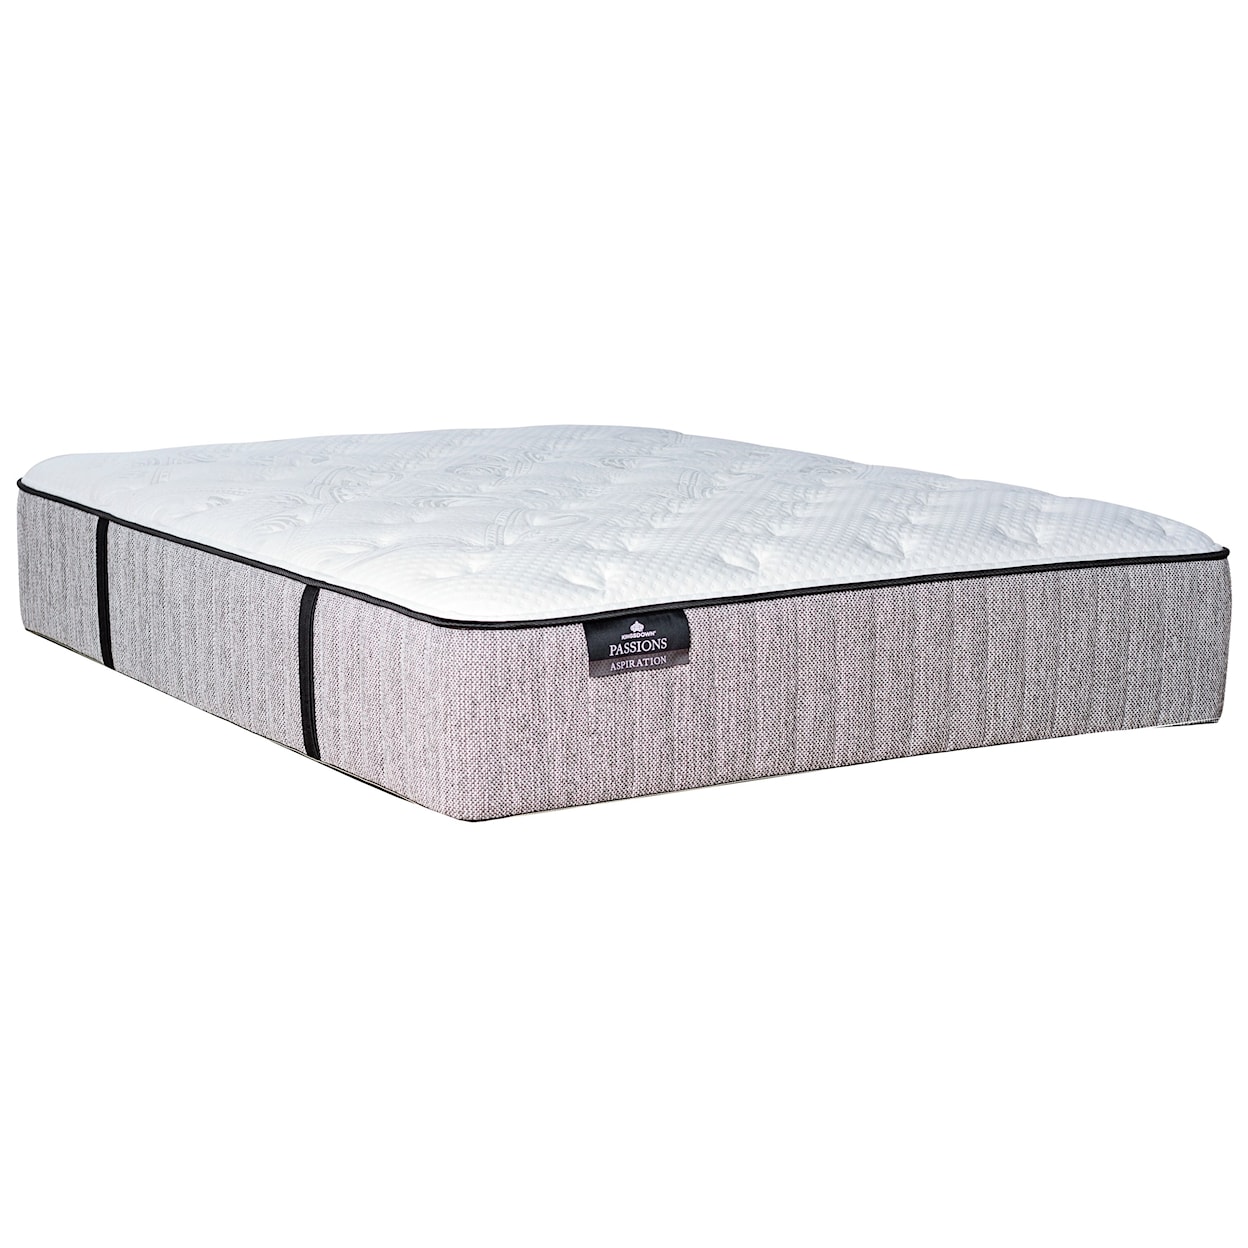 Kingsdown Passions Aspiration Plush Queen Plush Pocketed Coil Mattress